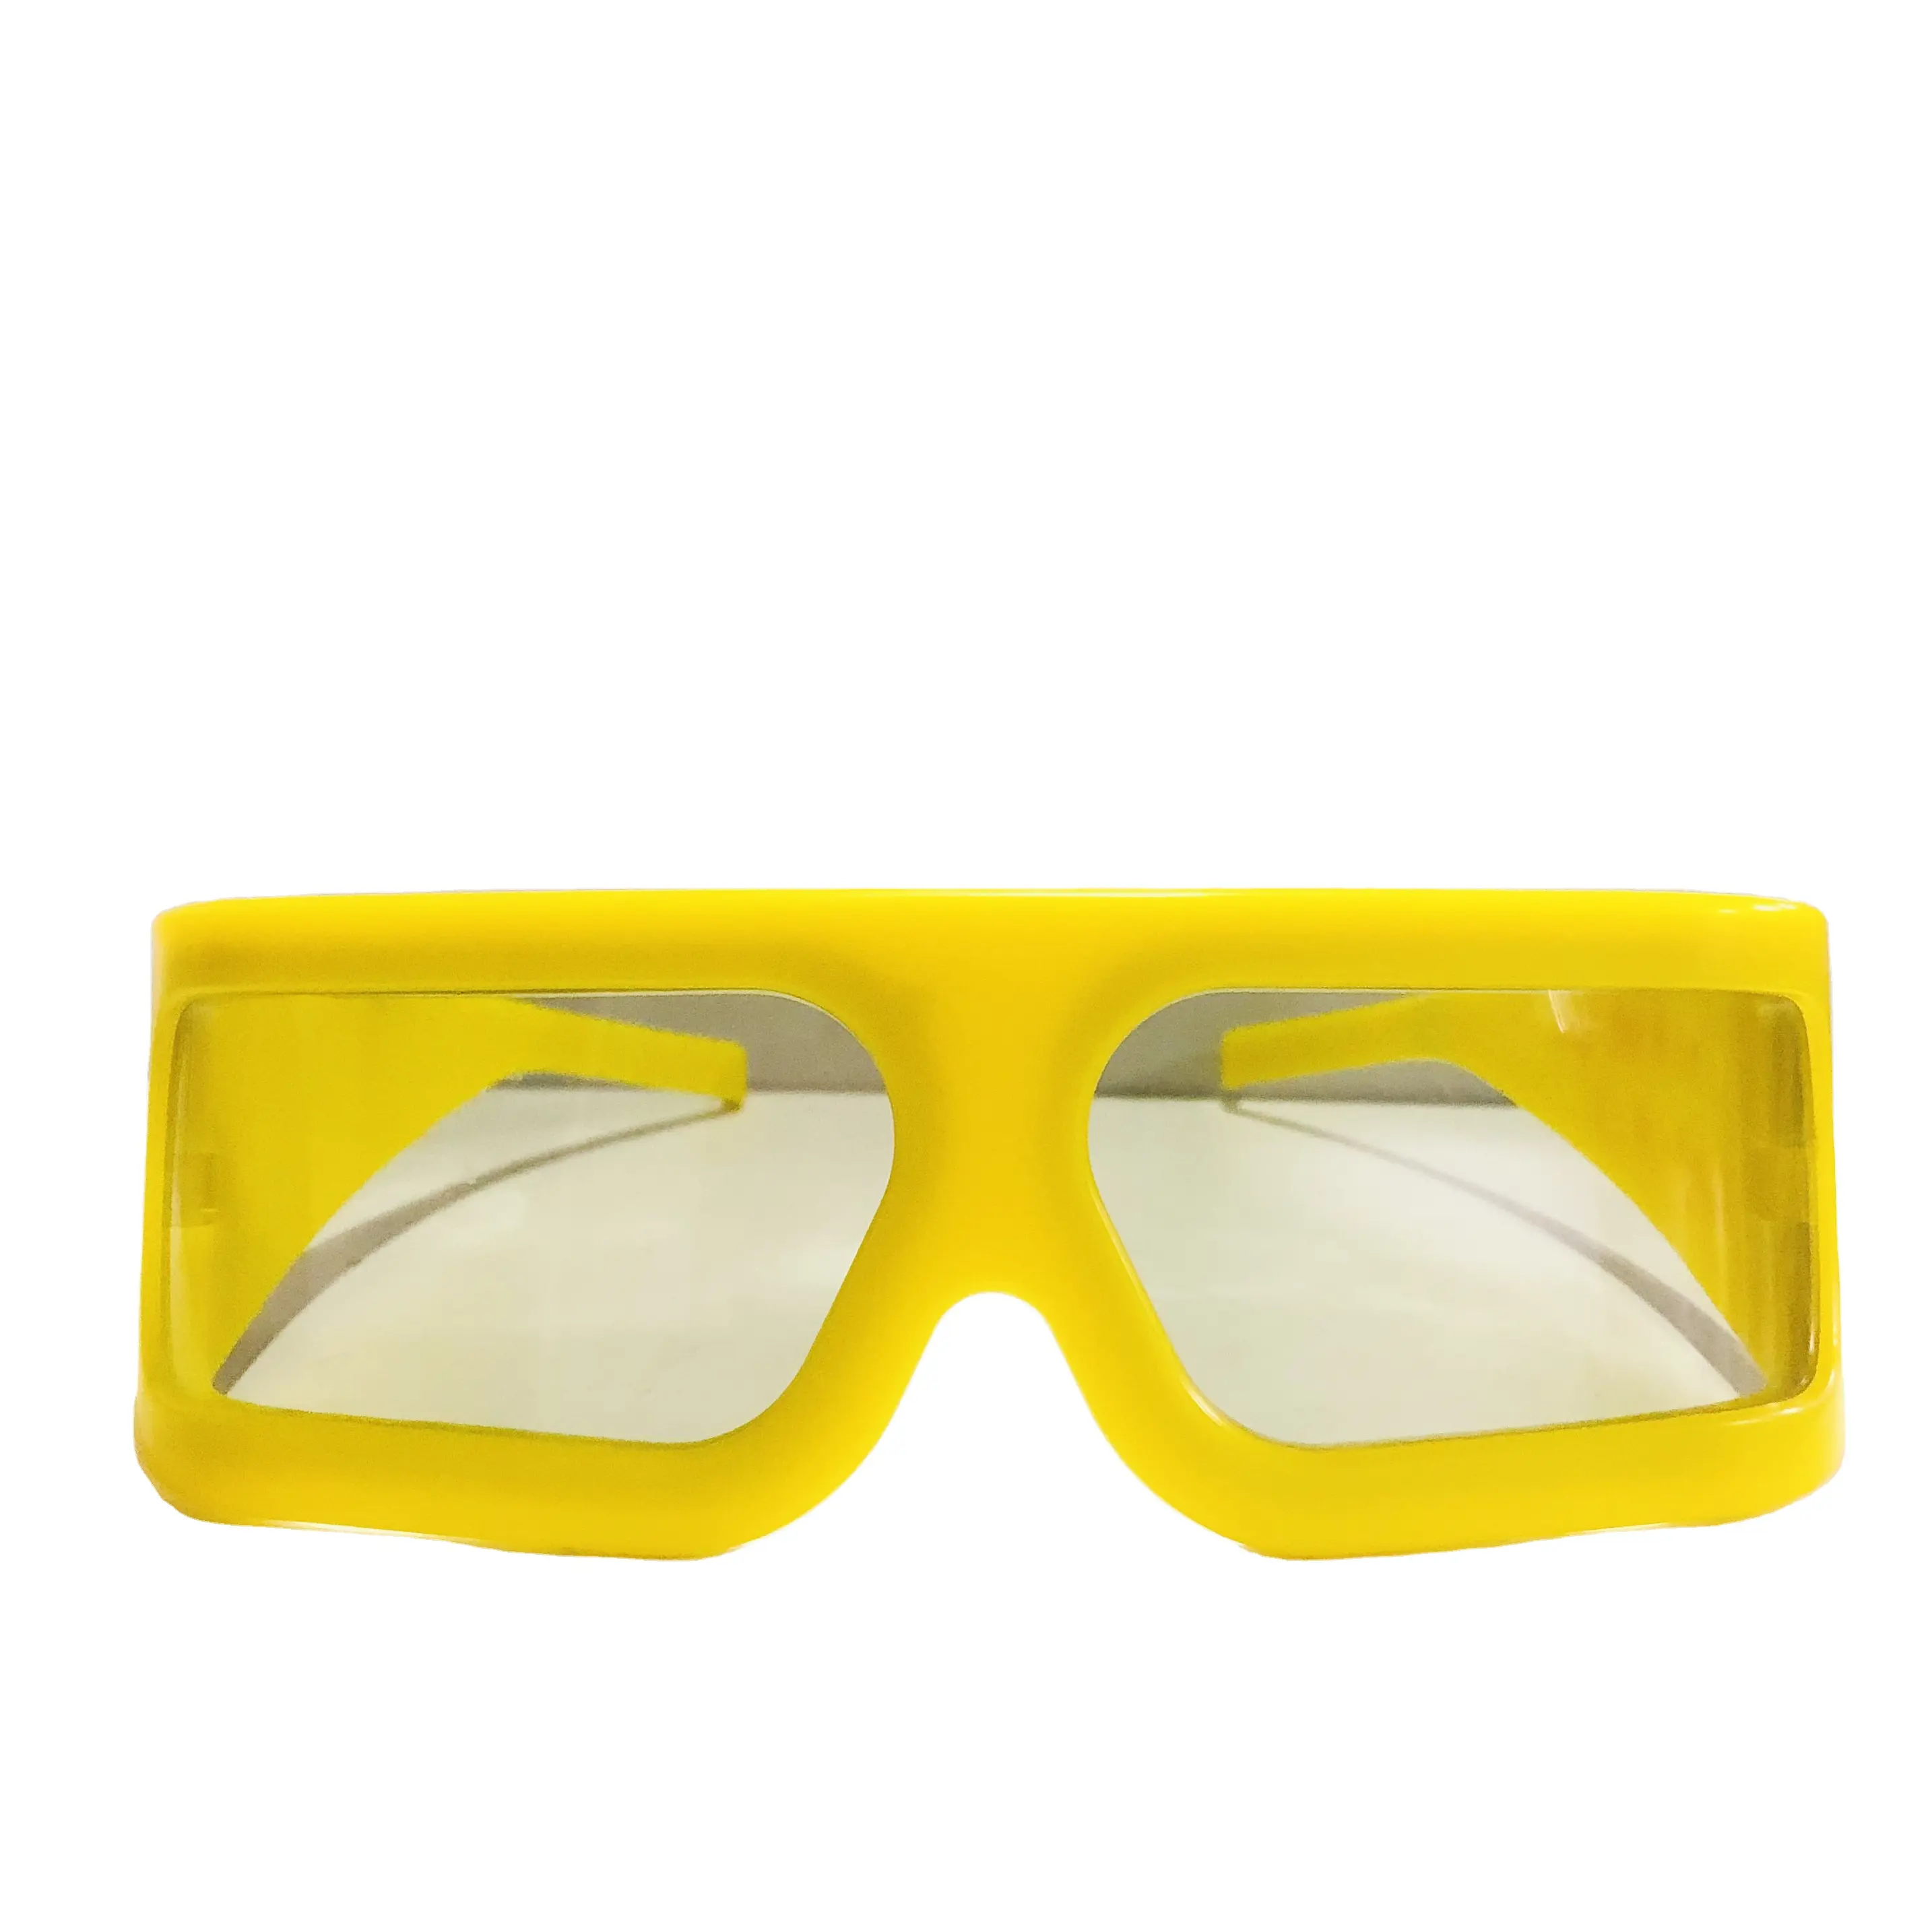 Theater 4D 5D 7D Linear or Circular Polarized 3D Glasses